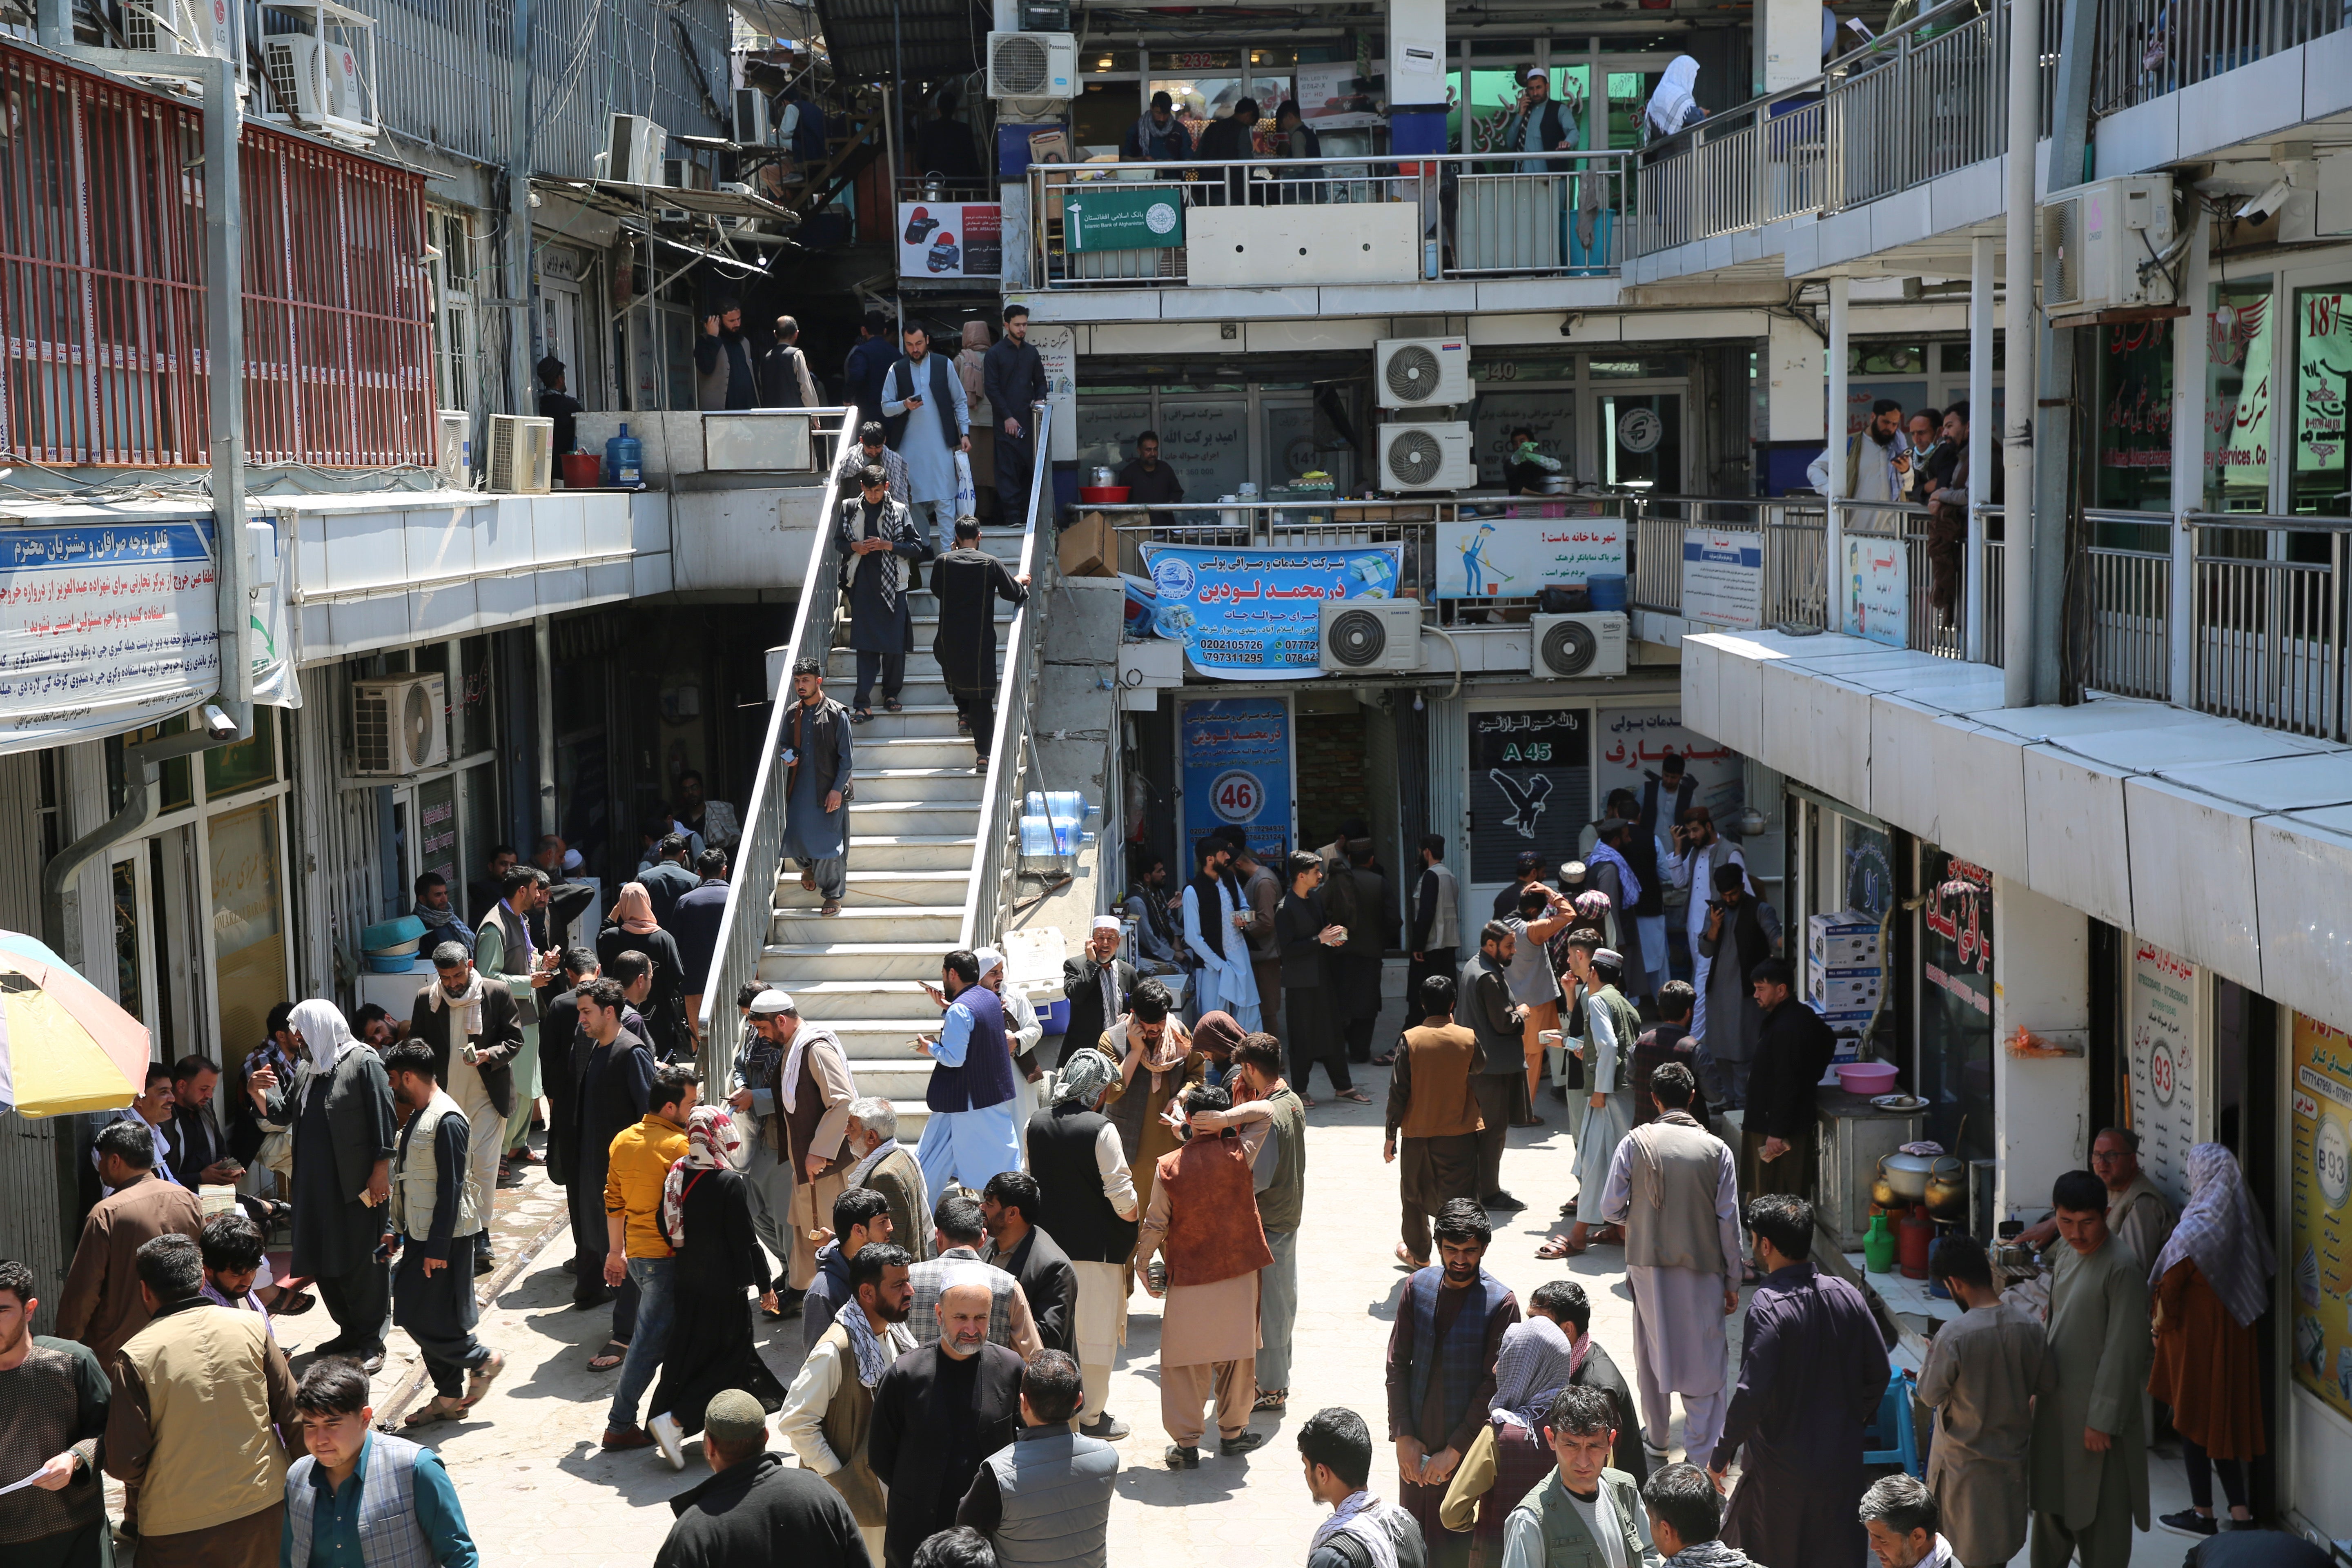 Afghans walk around a downtown currency exchange market in Kabul, Afghanistan, Monday, April 22